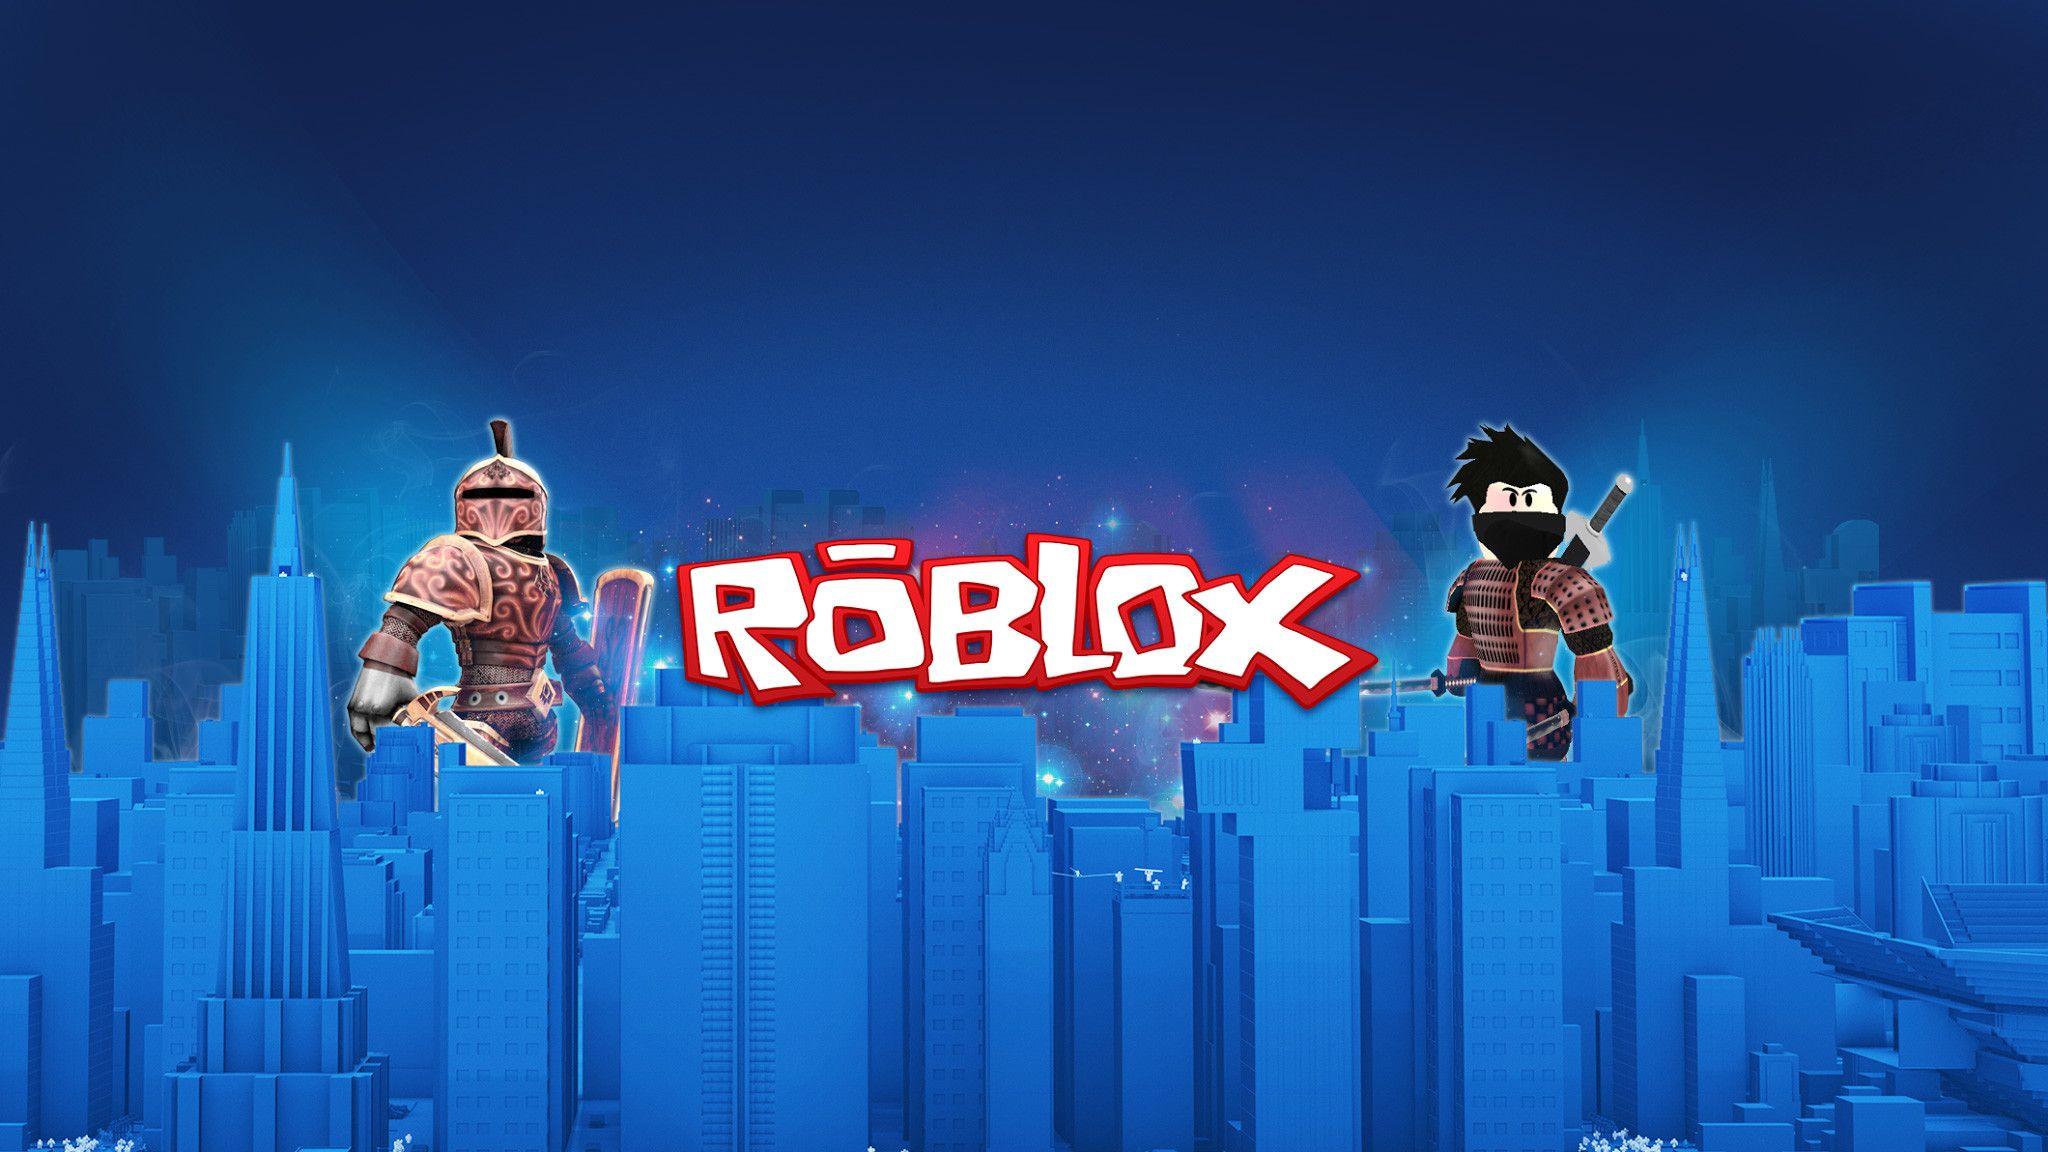 Cute Roblox Wallpapers Top Free Cute Roblox Backgrounds Wallpaperaccess